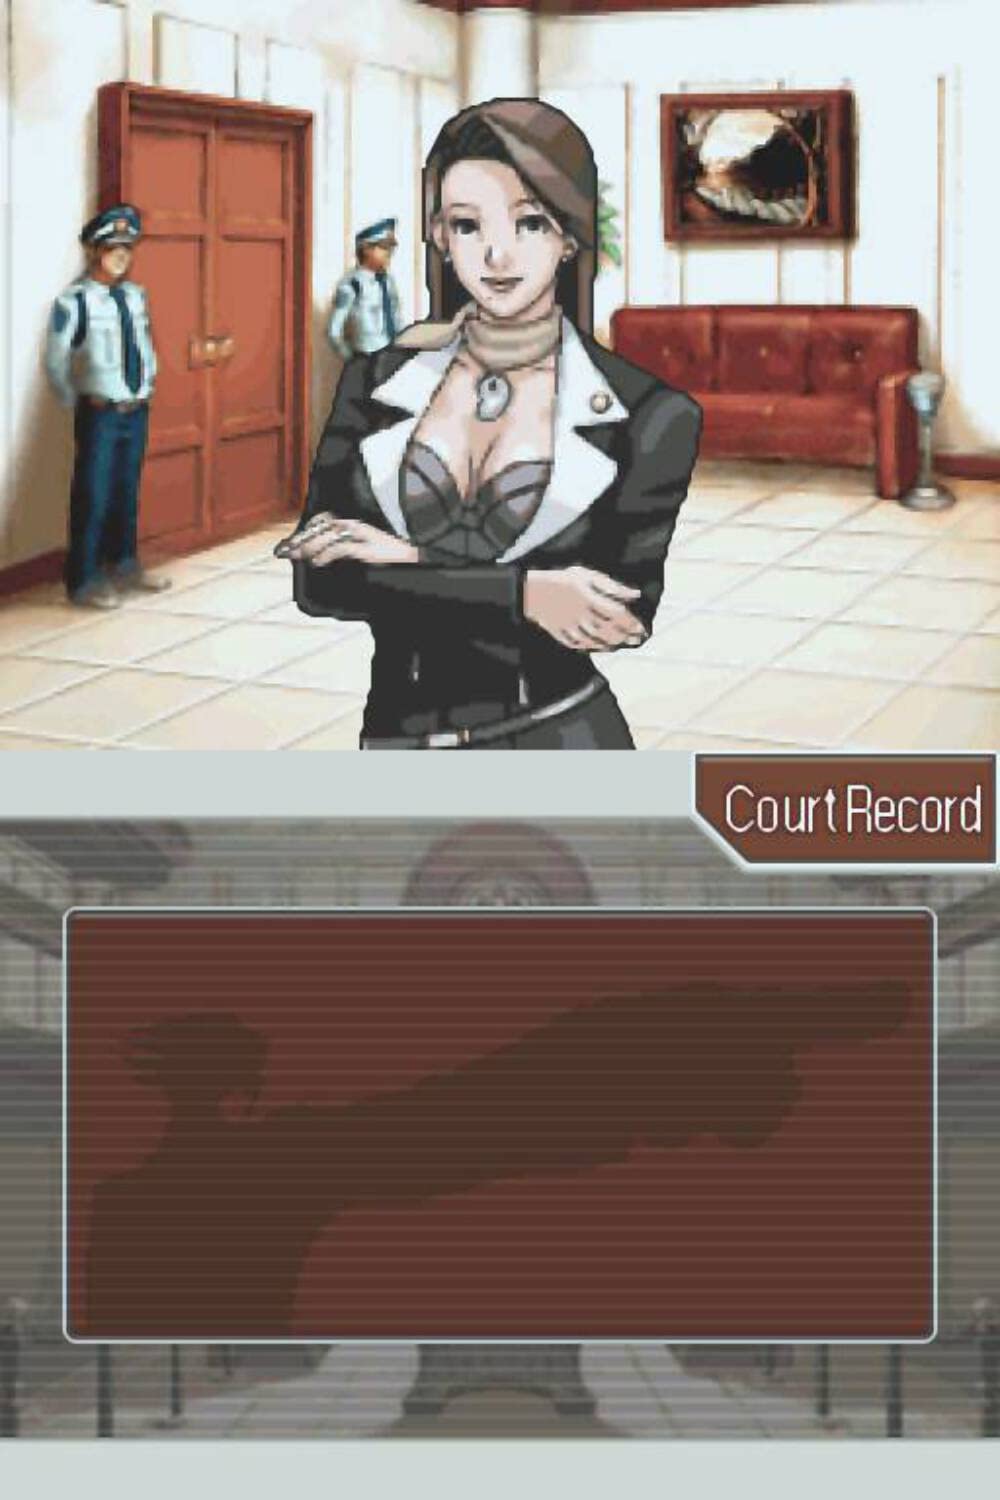 Phoenix Wright: Ace Attorney NDS - image 2 of 7